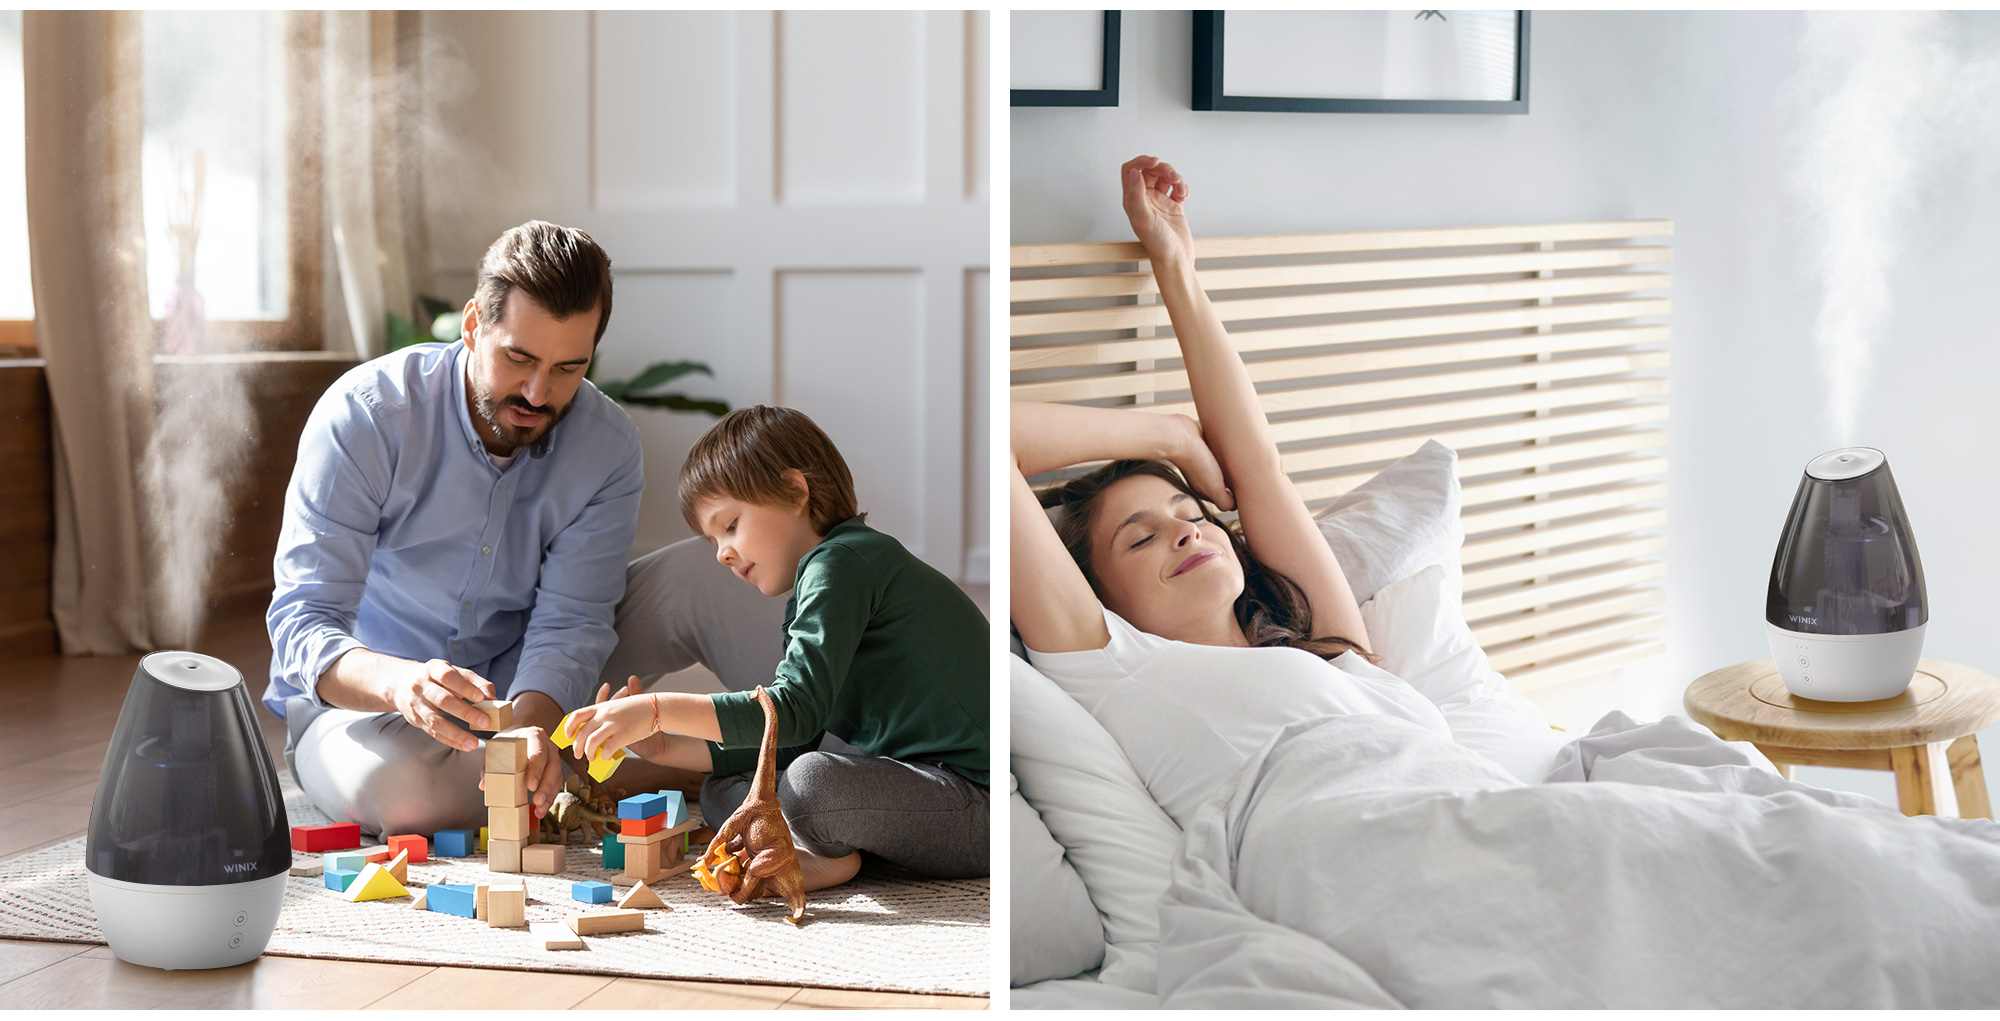 Split image of man and child playing on floor next to L100 humidifier and woman waking up in bed with L100 humidifier on nightstand